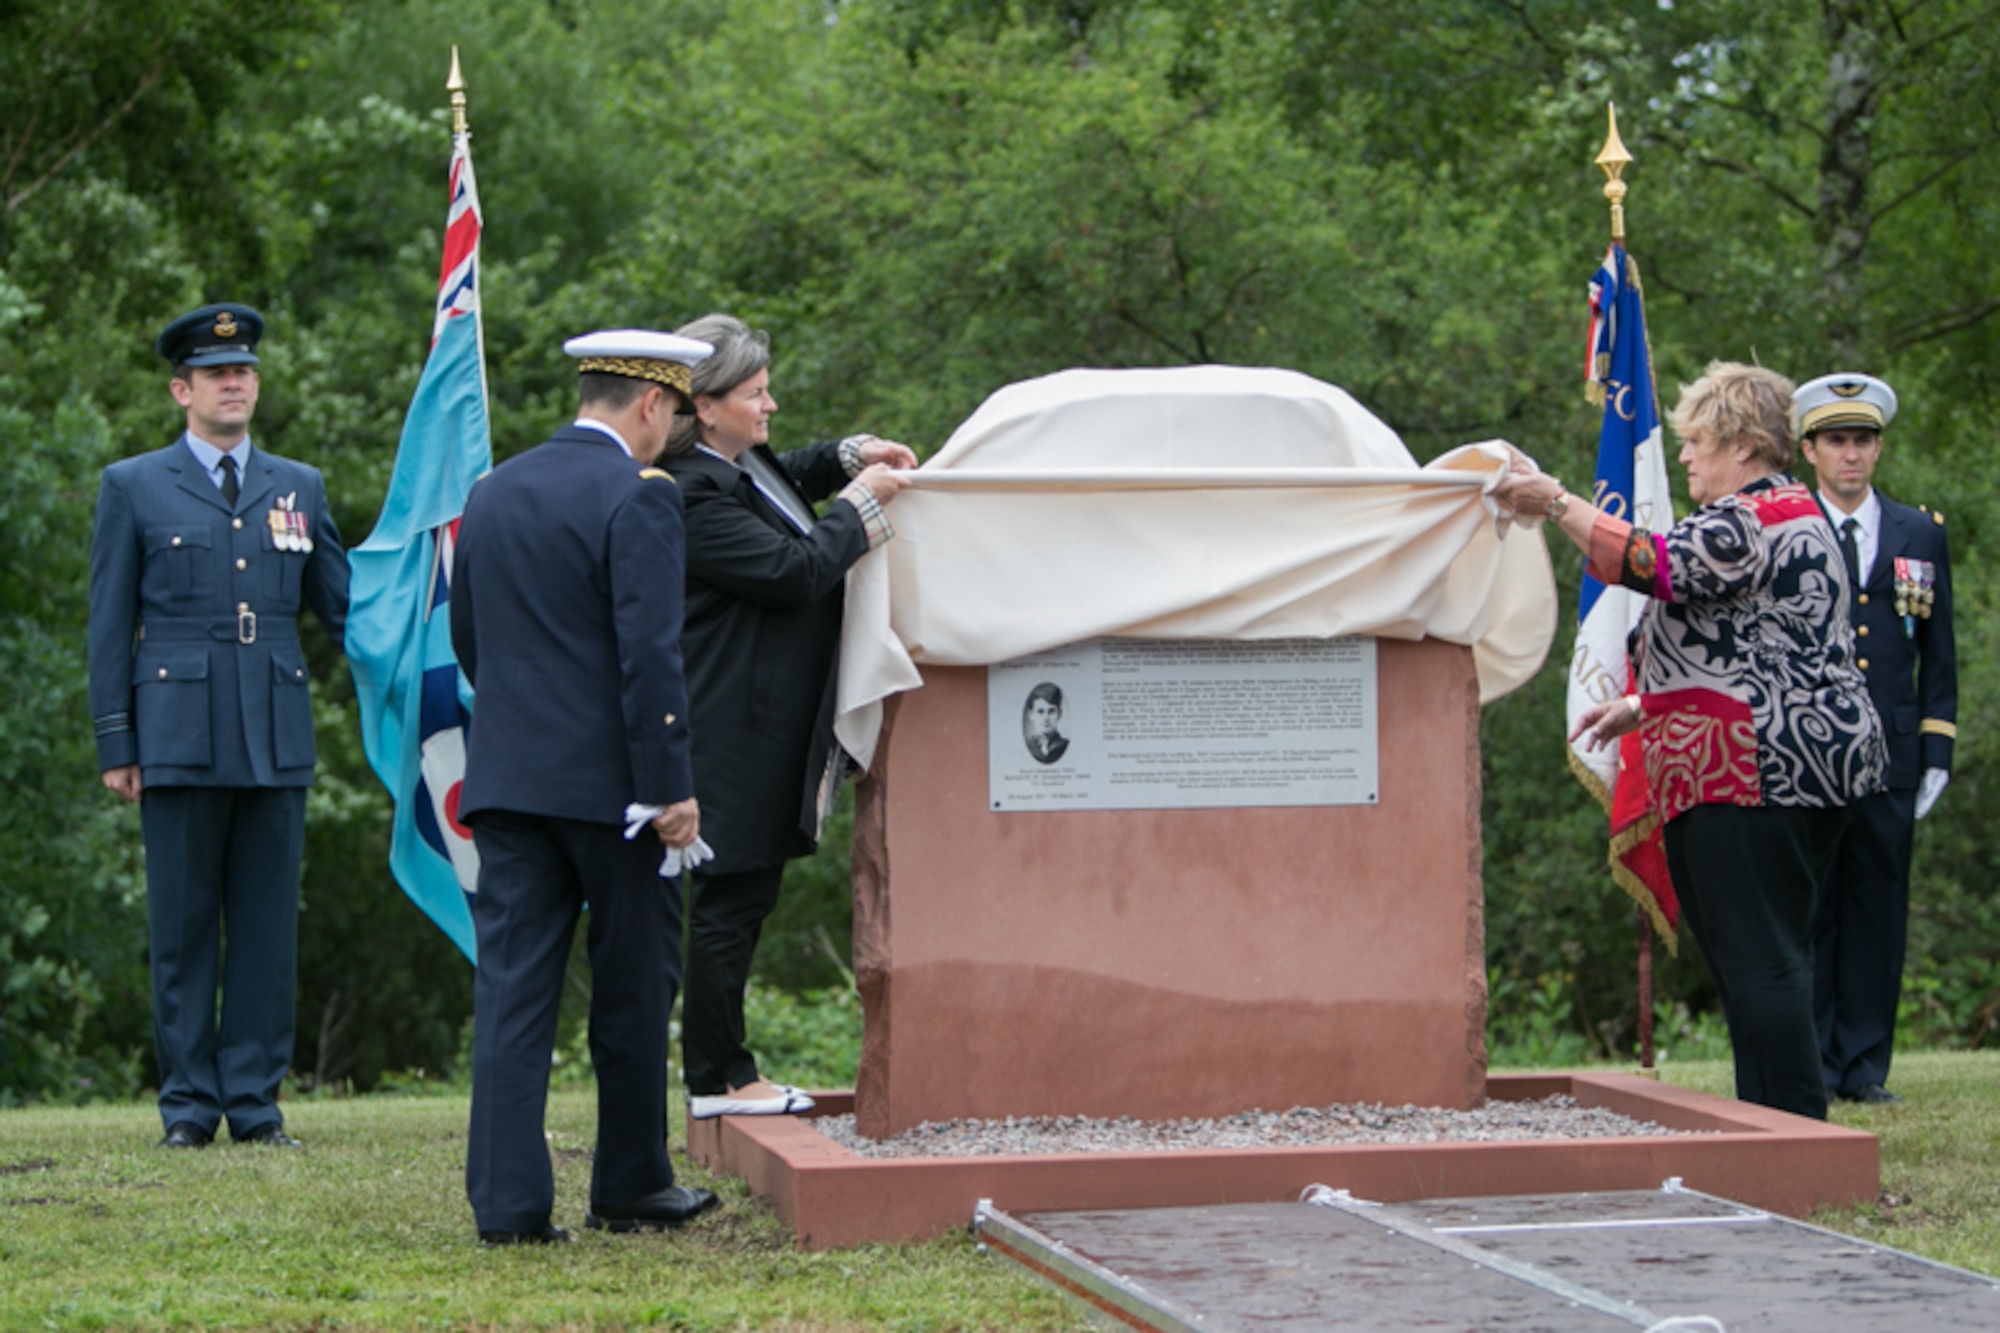 Christelle Magnee, French Air Force 2nd Lt. Bernad Scheidhauer’s great niece, and Caroline Kennard, Royal Air Force Squadron leader Roger Bushell’s niece, unveil a memorial to their relatives on July 1, 2017 outside Ramstein, German. Bushell and Scheidhauer were among the 76 Allied prisoners of war who had escaped from Luft Stalag III at Sagan, Germany (now Poland) on March 24, 1944, in what became known as “The Great Escape.”  (U.S. Air Force photo by Staff Sgt. Timothy Moore)